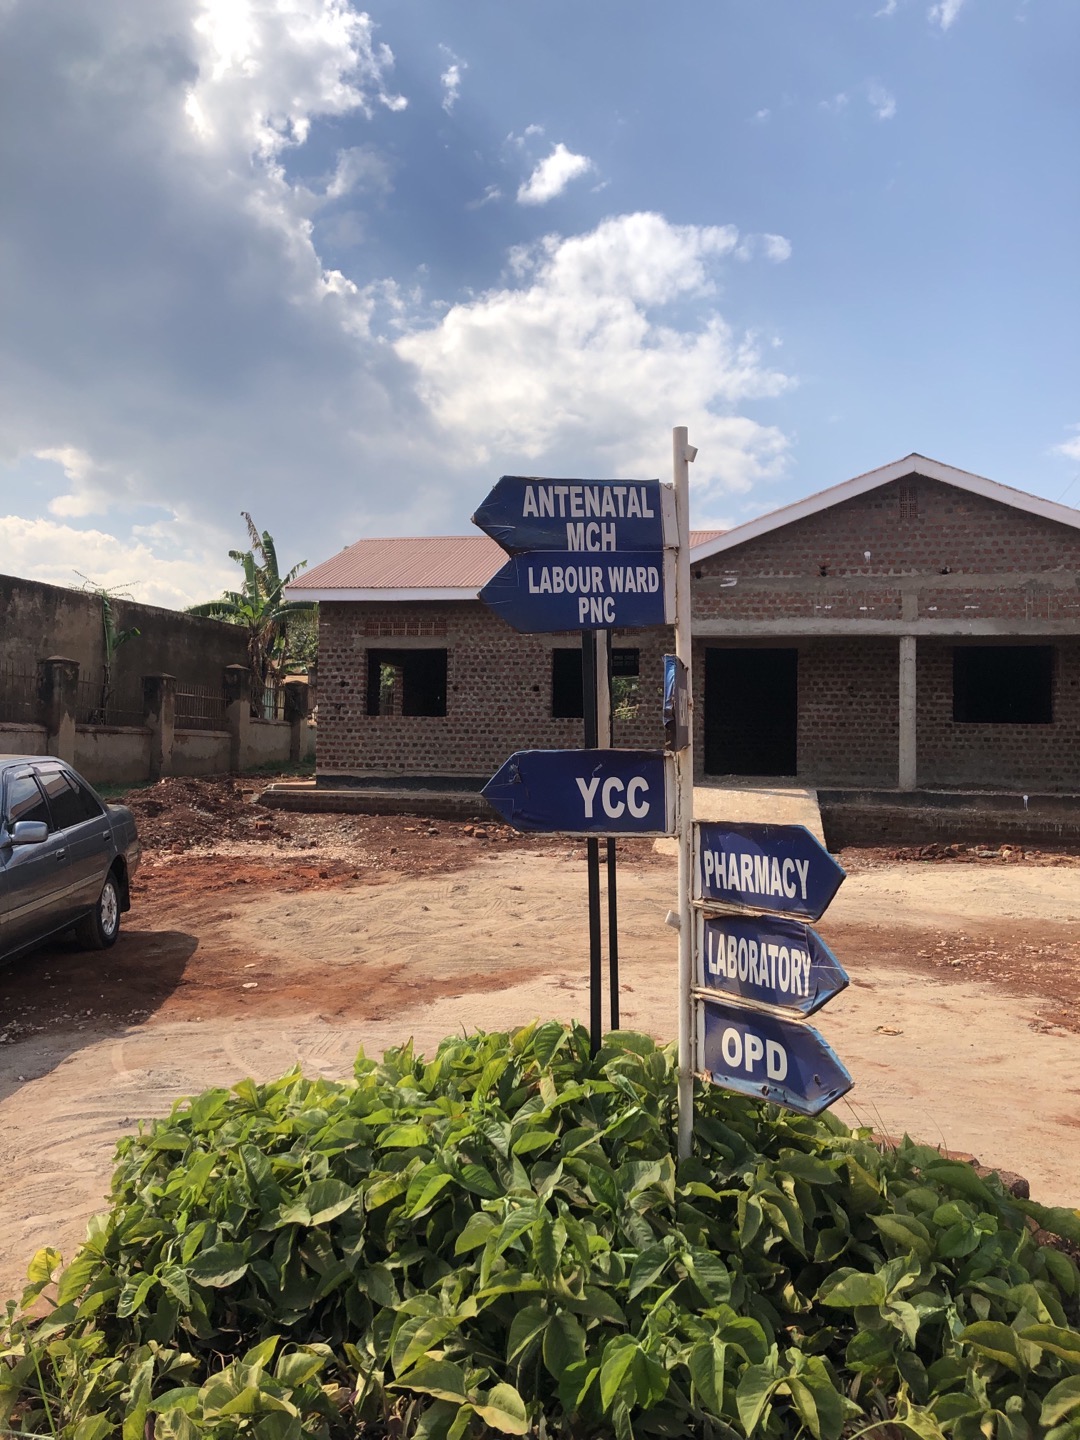 Image of a brick building with signs out front pointing to "Antenatal MCH, Labour ward PNC, YCC, Pharmacy, Laboratory, OPD"